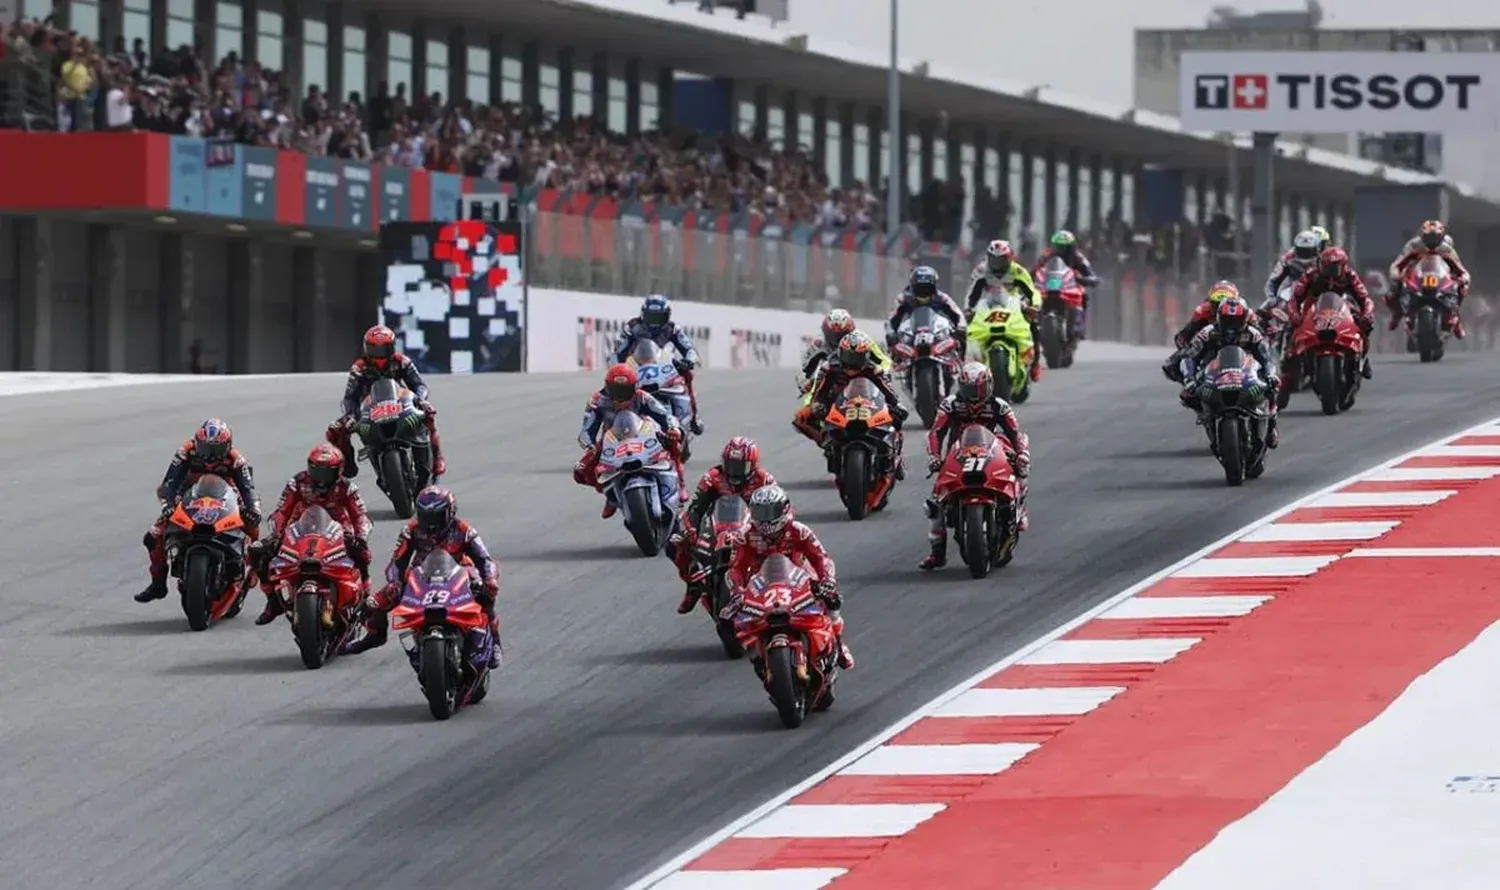 MotoGP, Now Accelerating into a New Chapter with Liberty Media